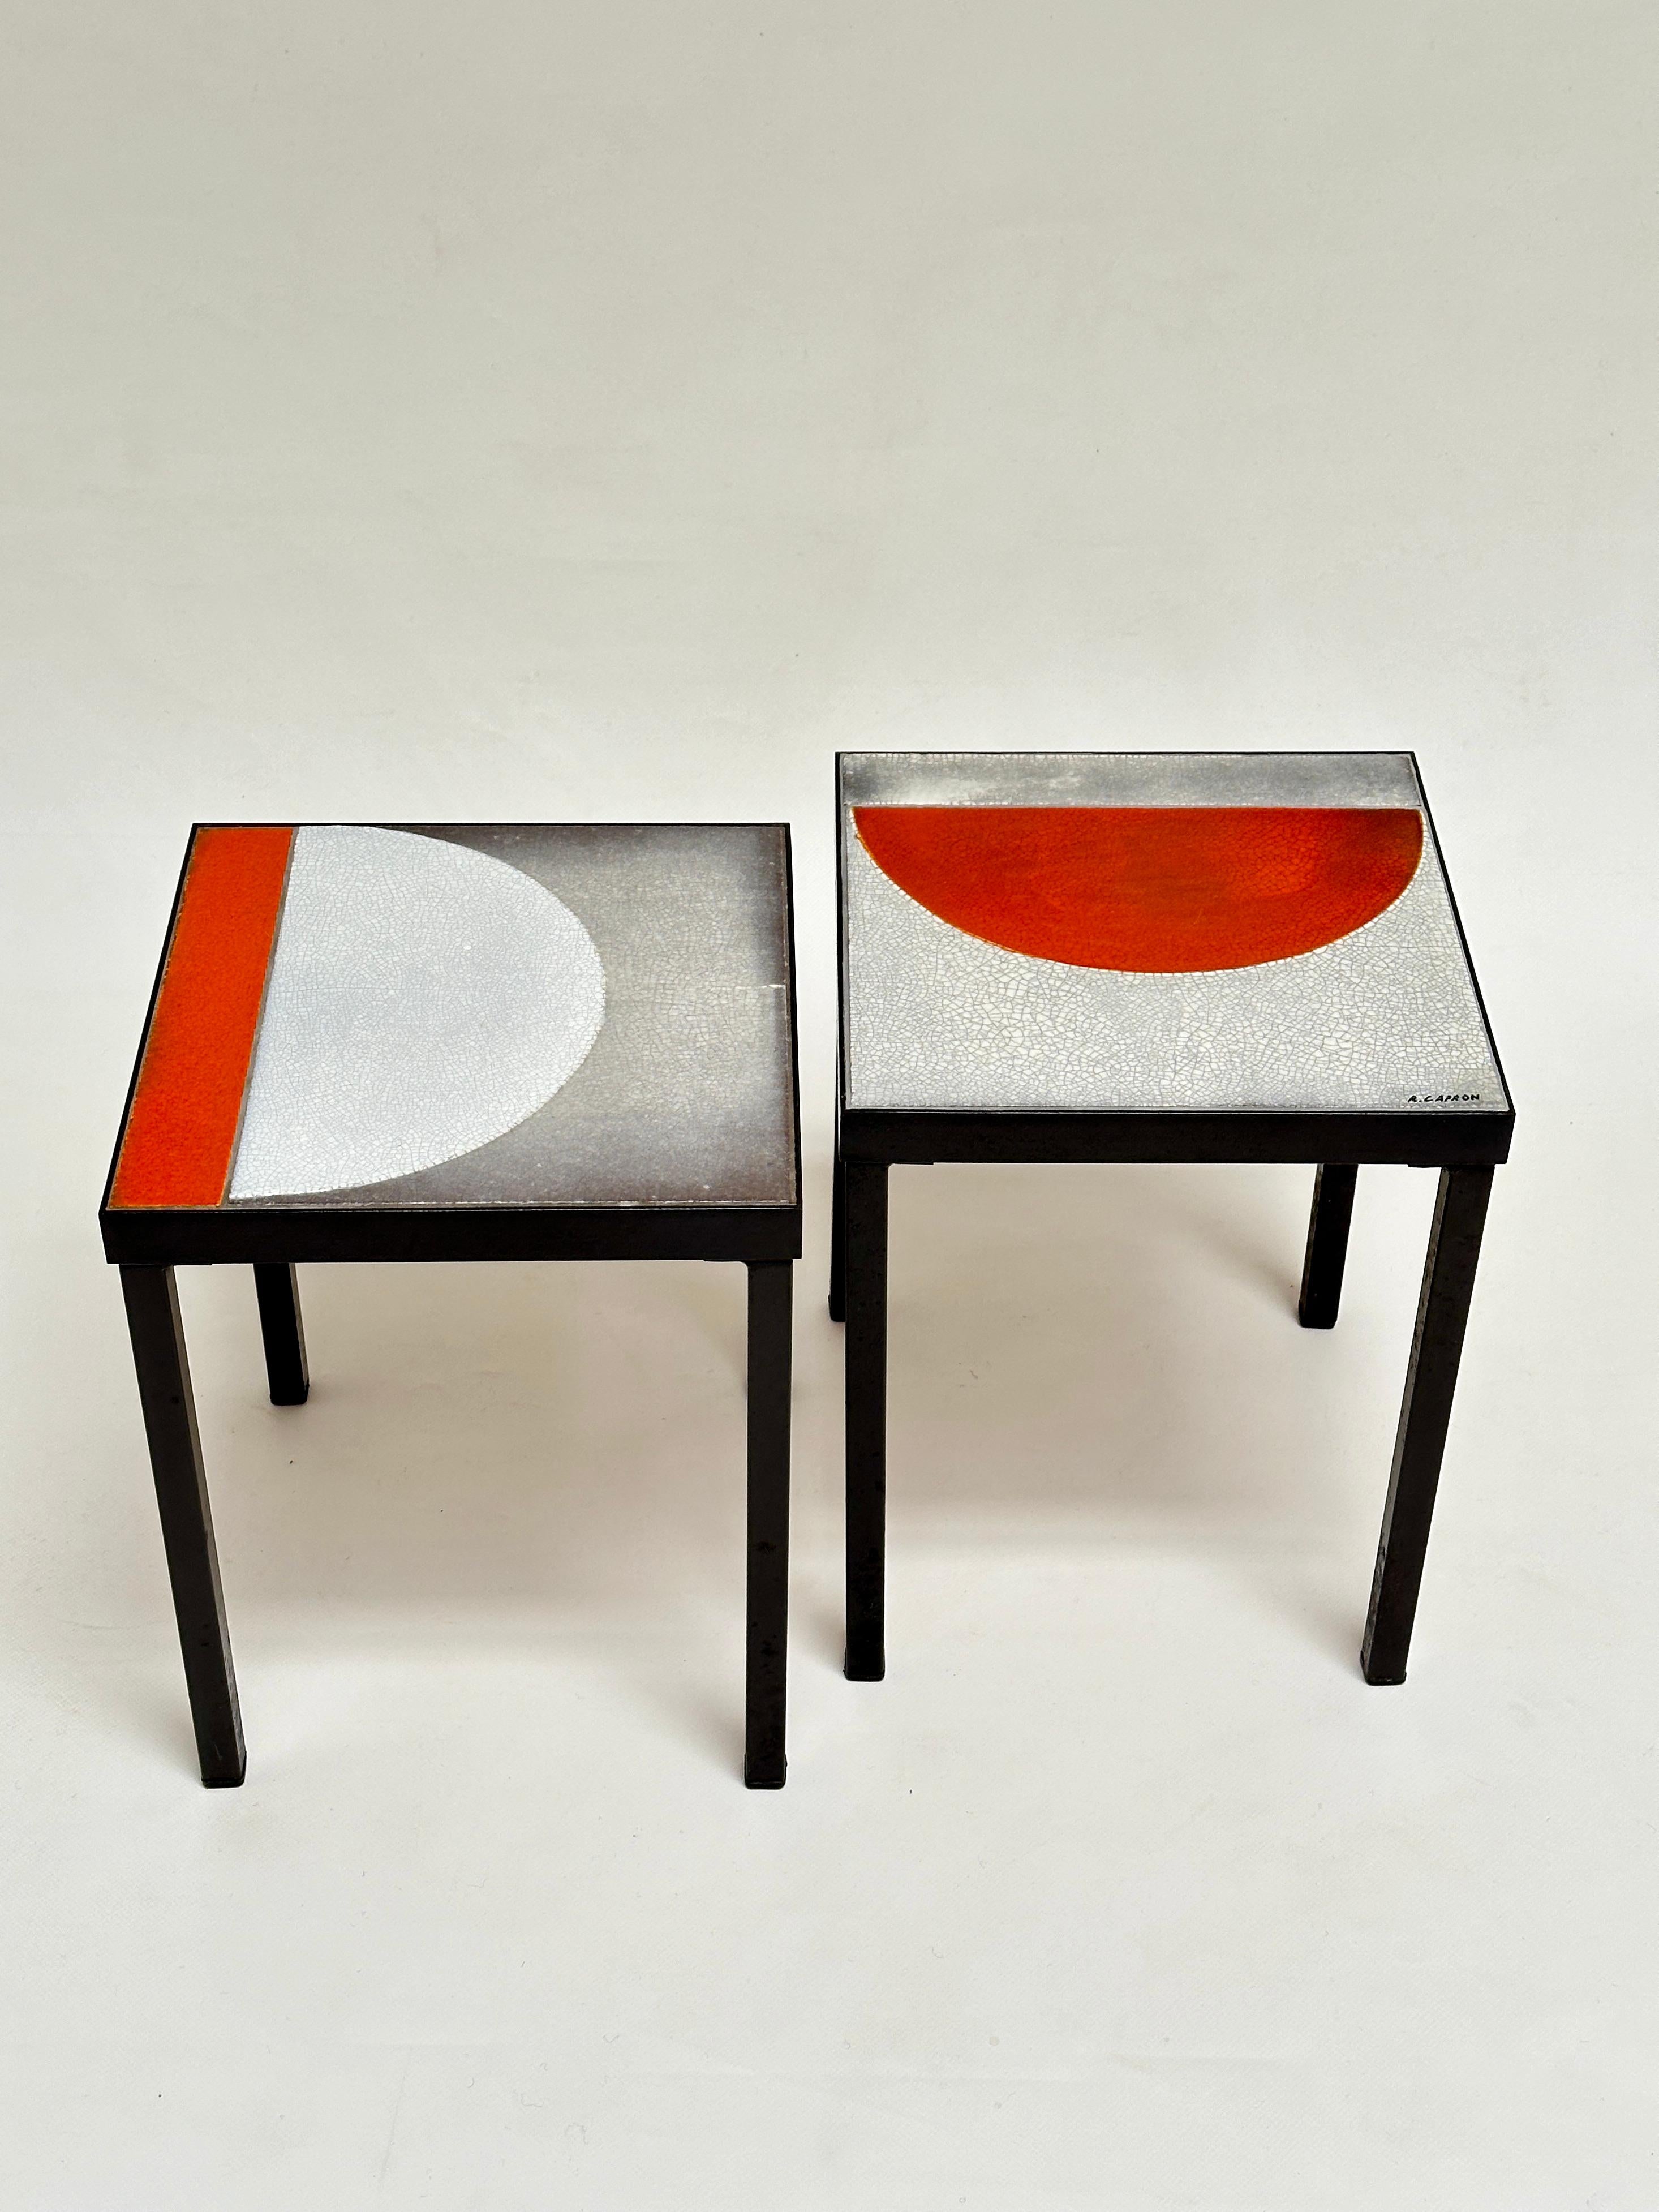 Lava Pair of Low Tables, Roger Capron, Vallauris, c. 1965 For Sale